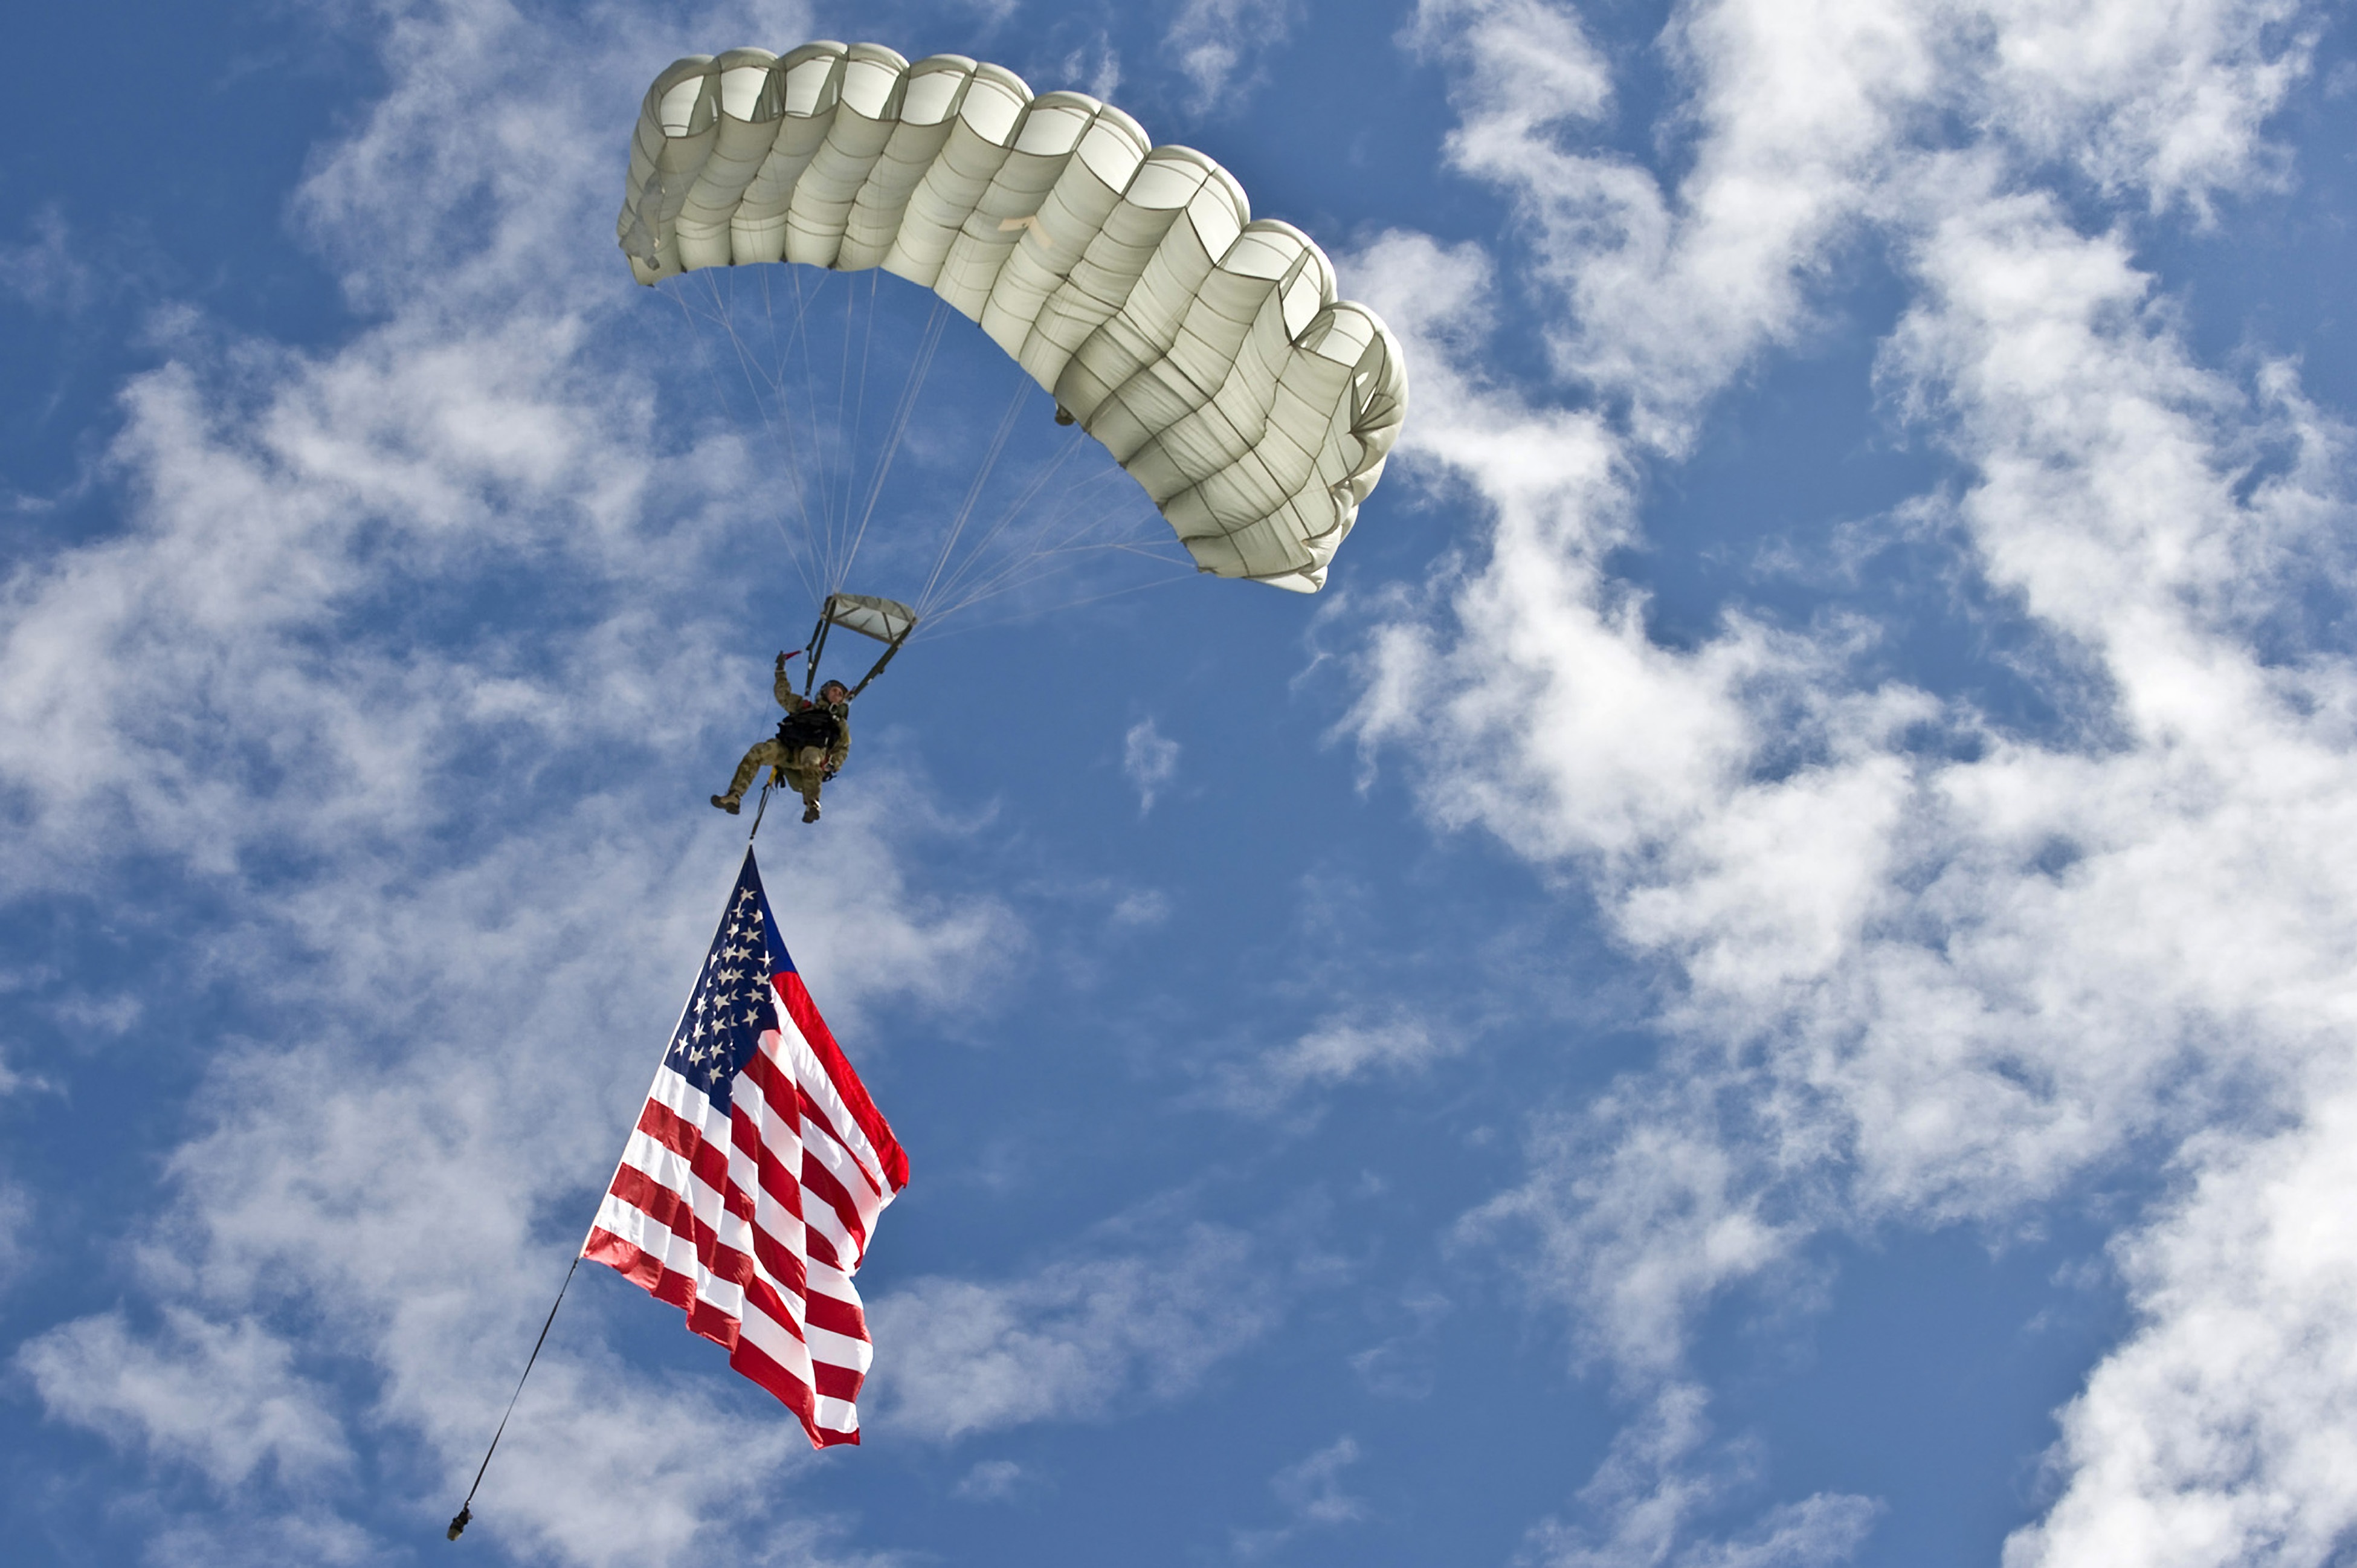 November 12, 2011 - A U.S. Air Force combat controller jumps with the American flag during the 2011 Aviation Nation Open House at Nellis Air Force Base, Nevada.